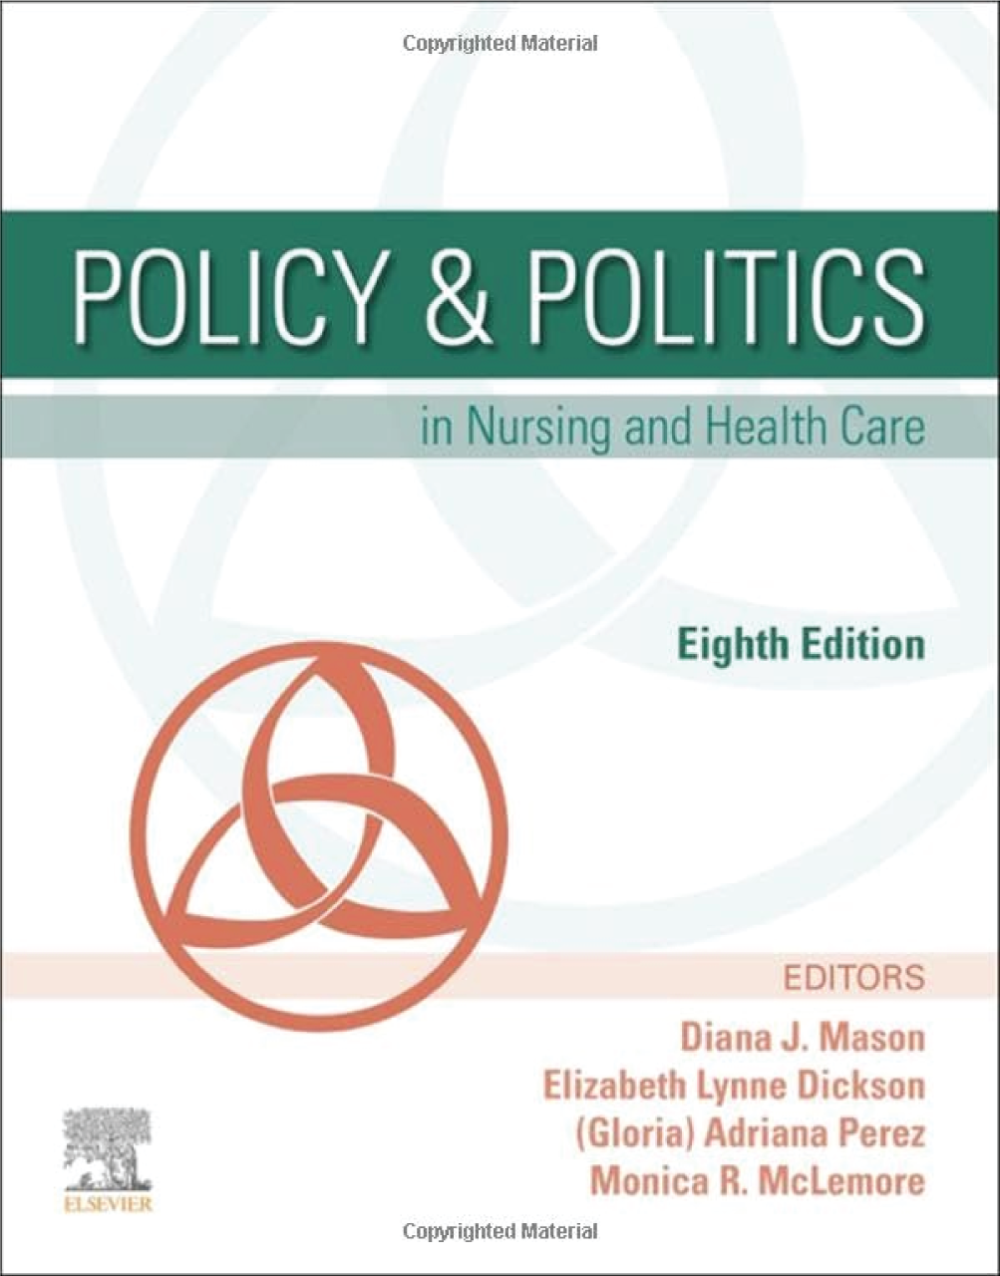 Policy & Politics in Nursing and Health Care 8th Edition